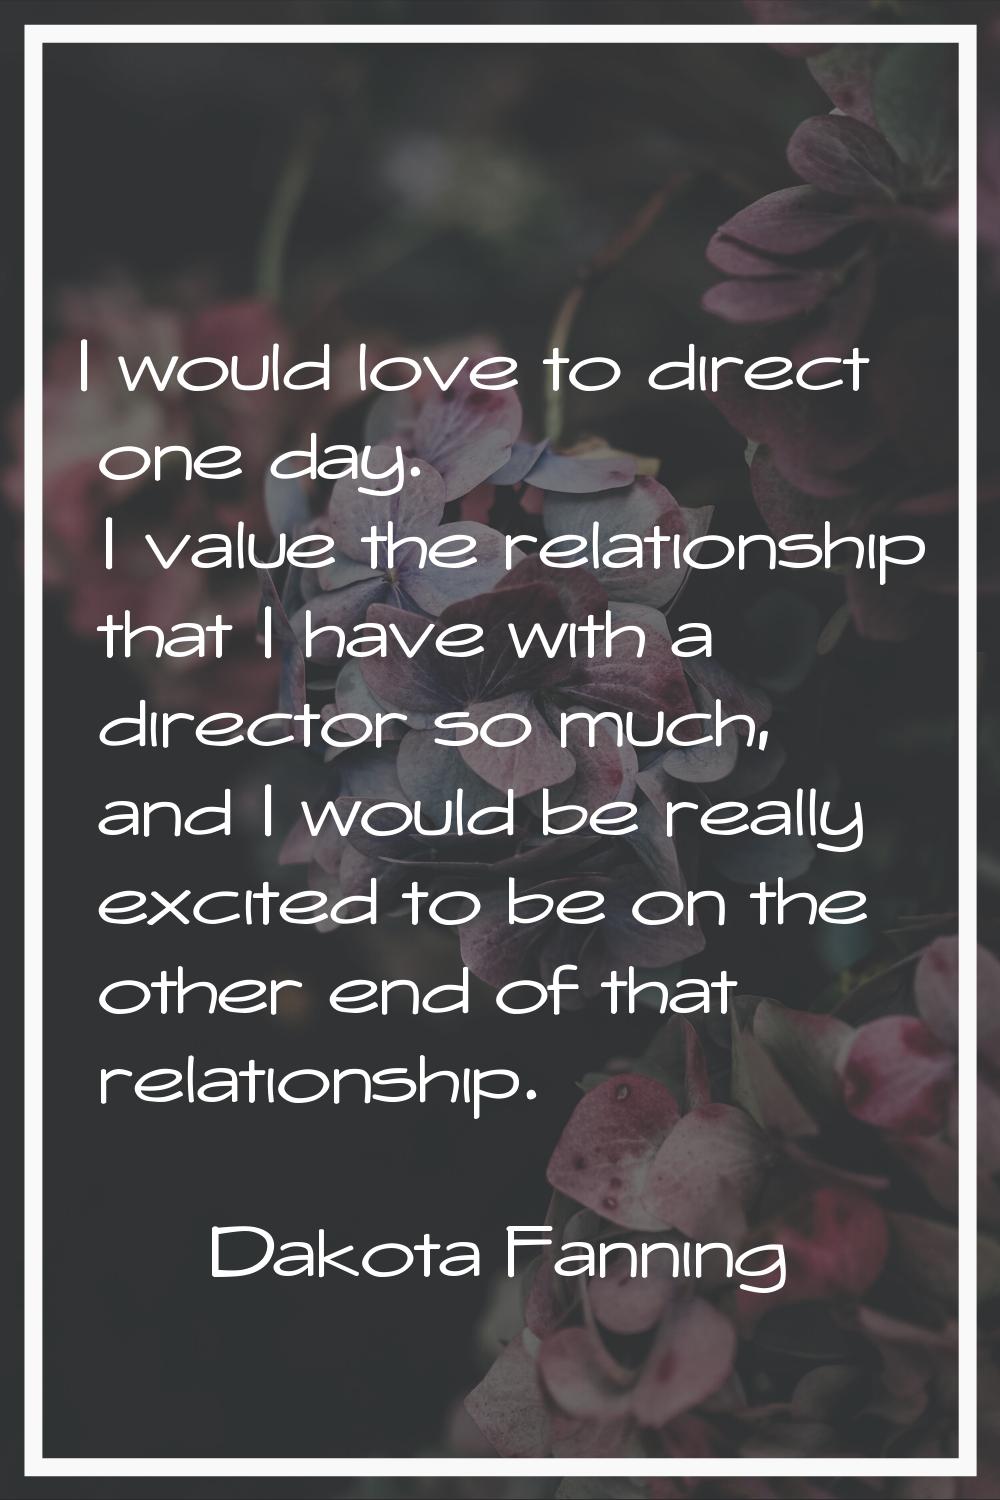 I would love to direct one day. I value the relationship that I have with a director so much, and I